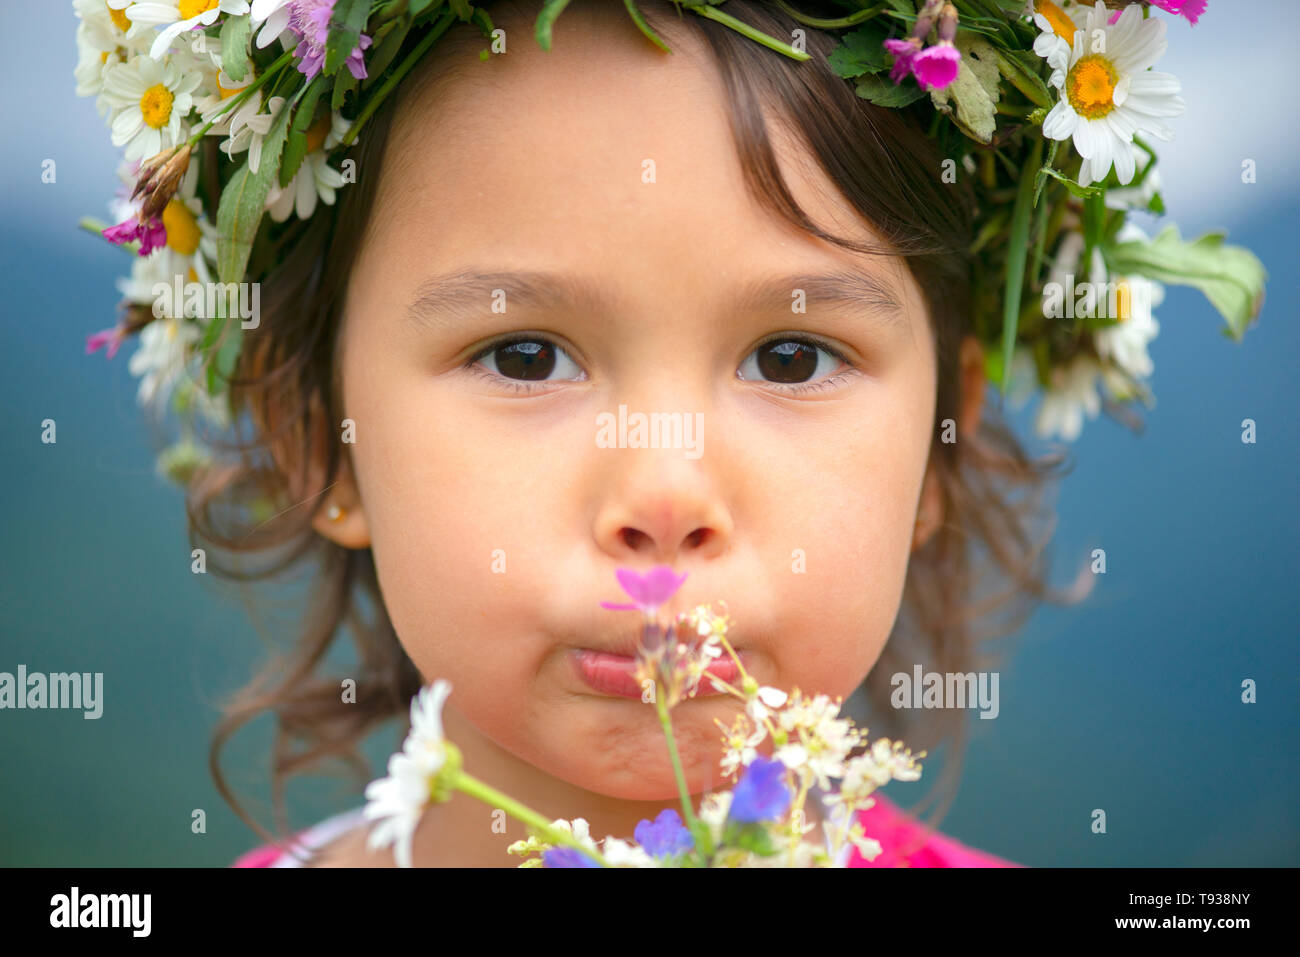 cute girl with flower crown smiling and having fun on meadow Stock Photo